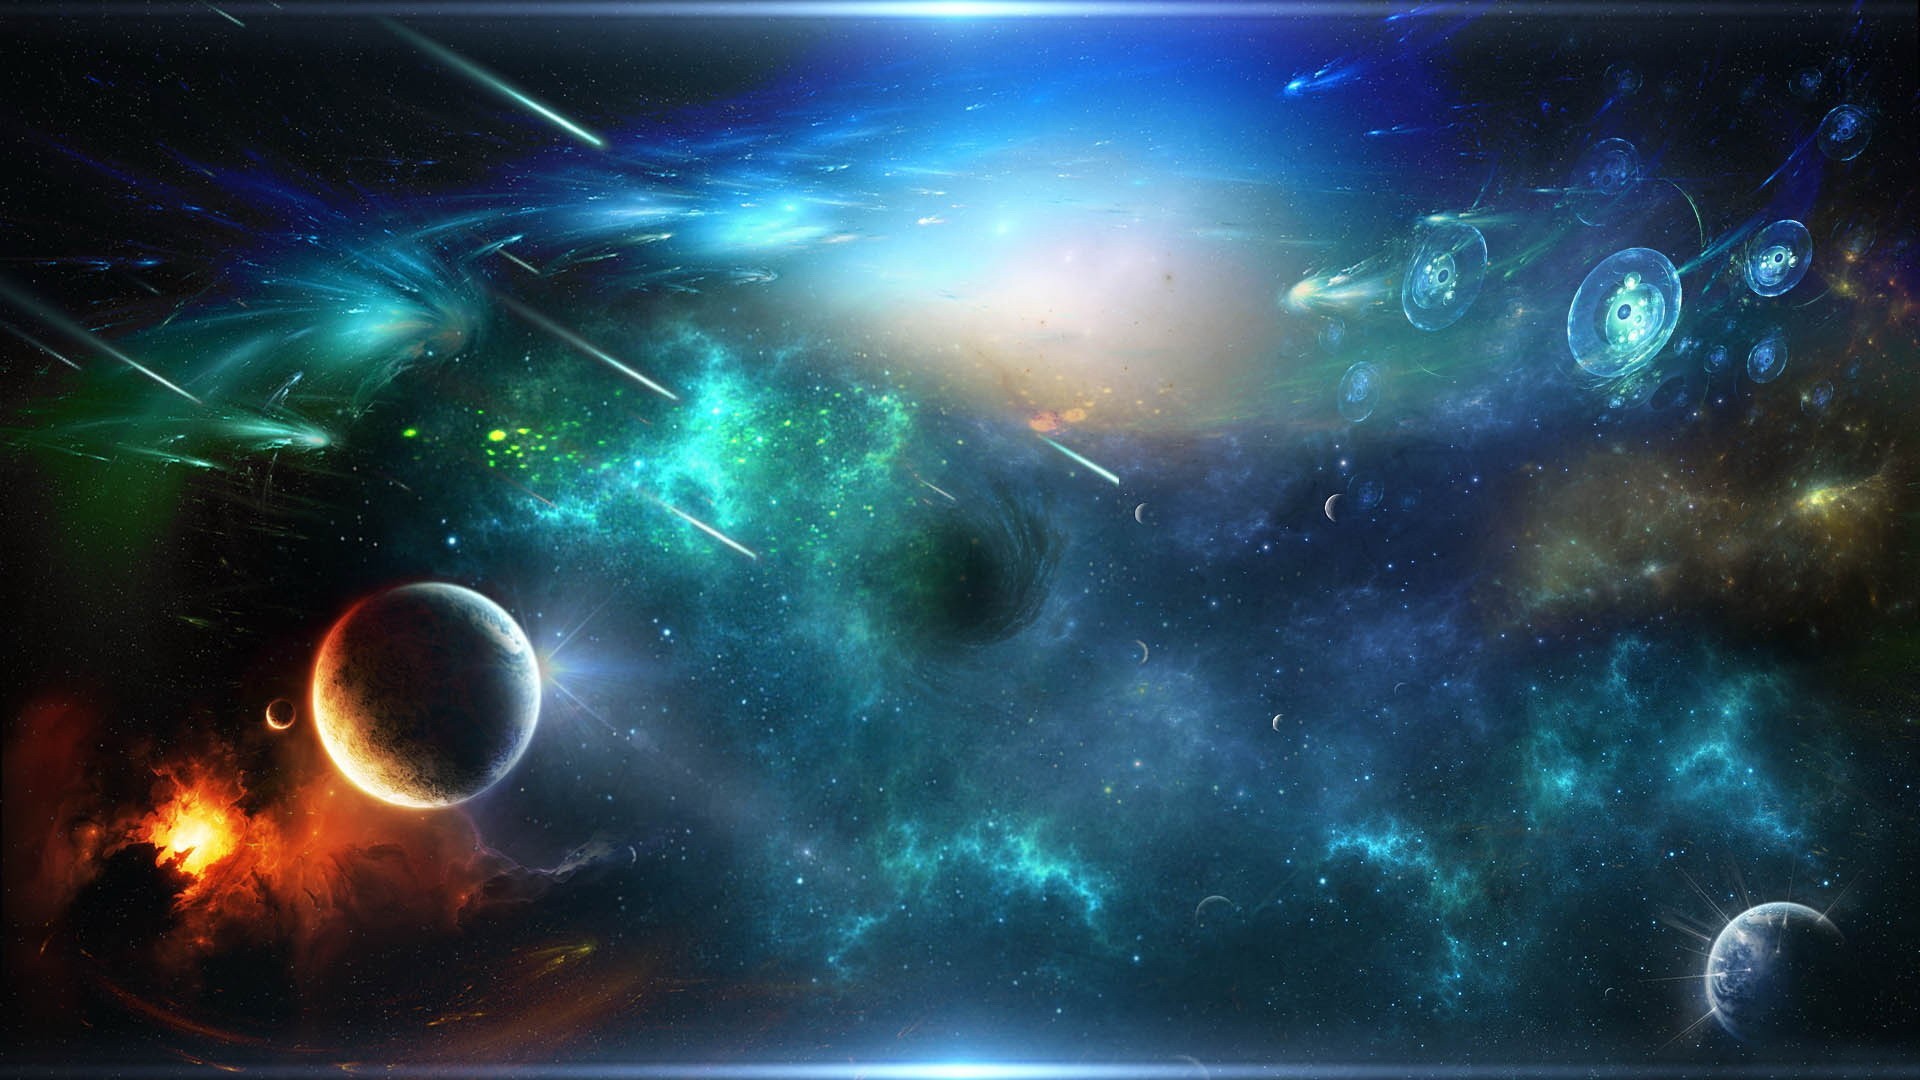 Wallpaper Doomsday In Planetary System - Planets And Stars Background , HD Wallpaper & Backgrounds